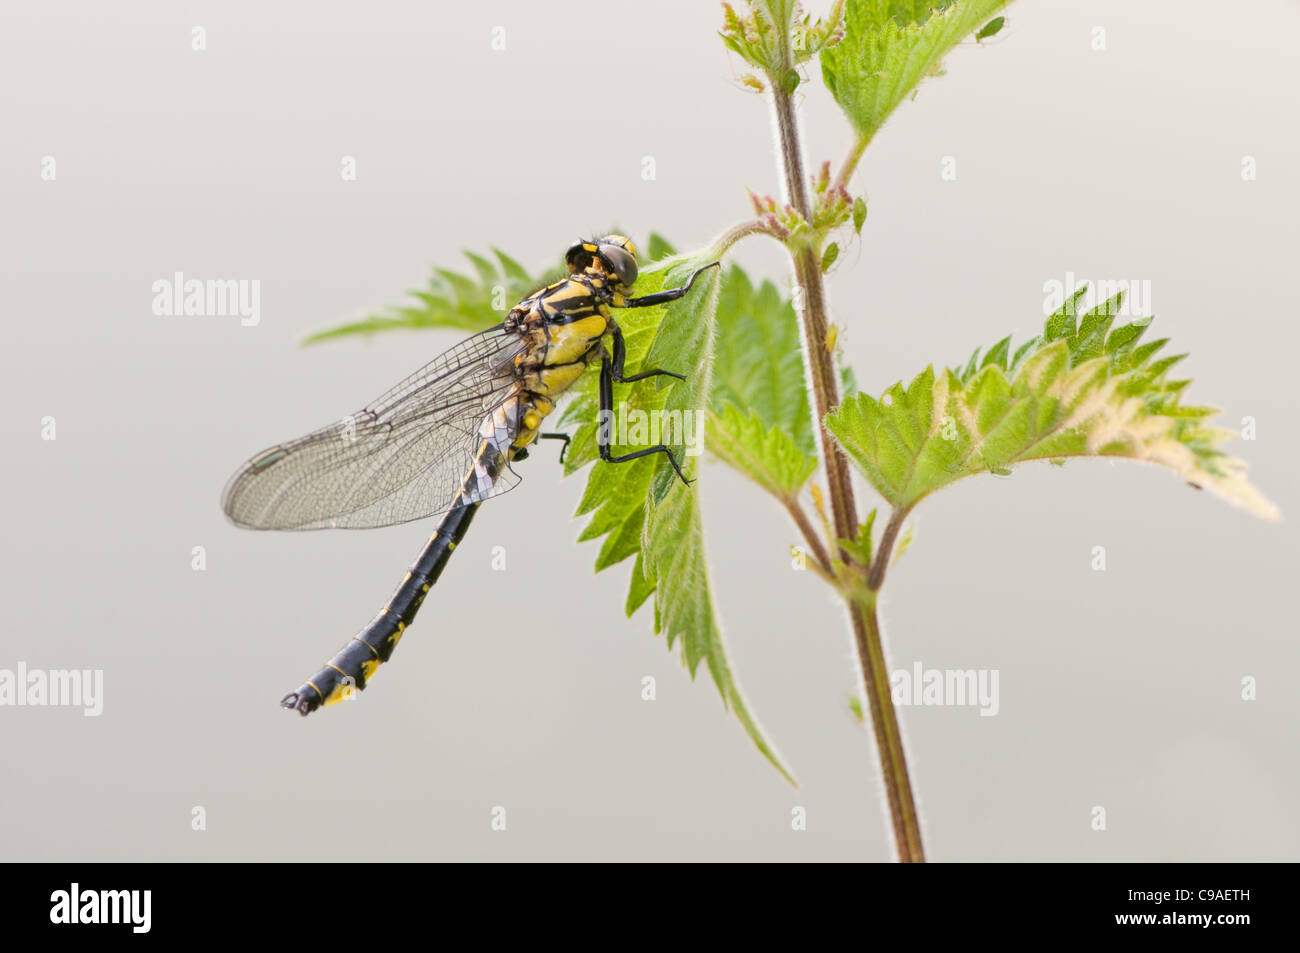 Club-tailed Dragonfly on the Thames at Goring Stock Photo